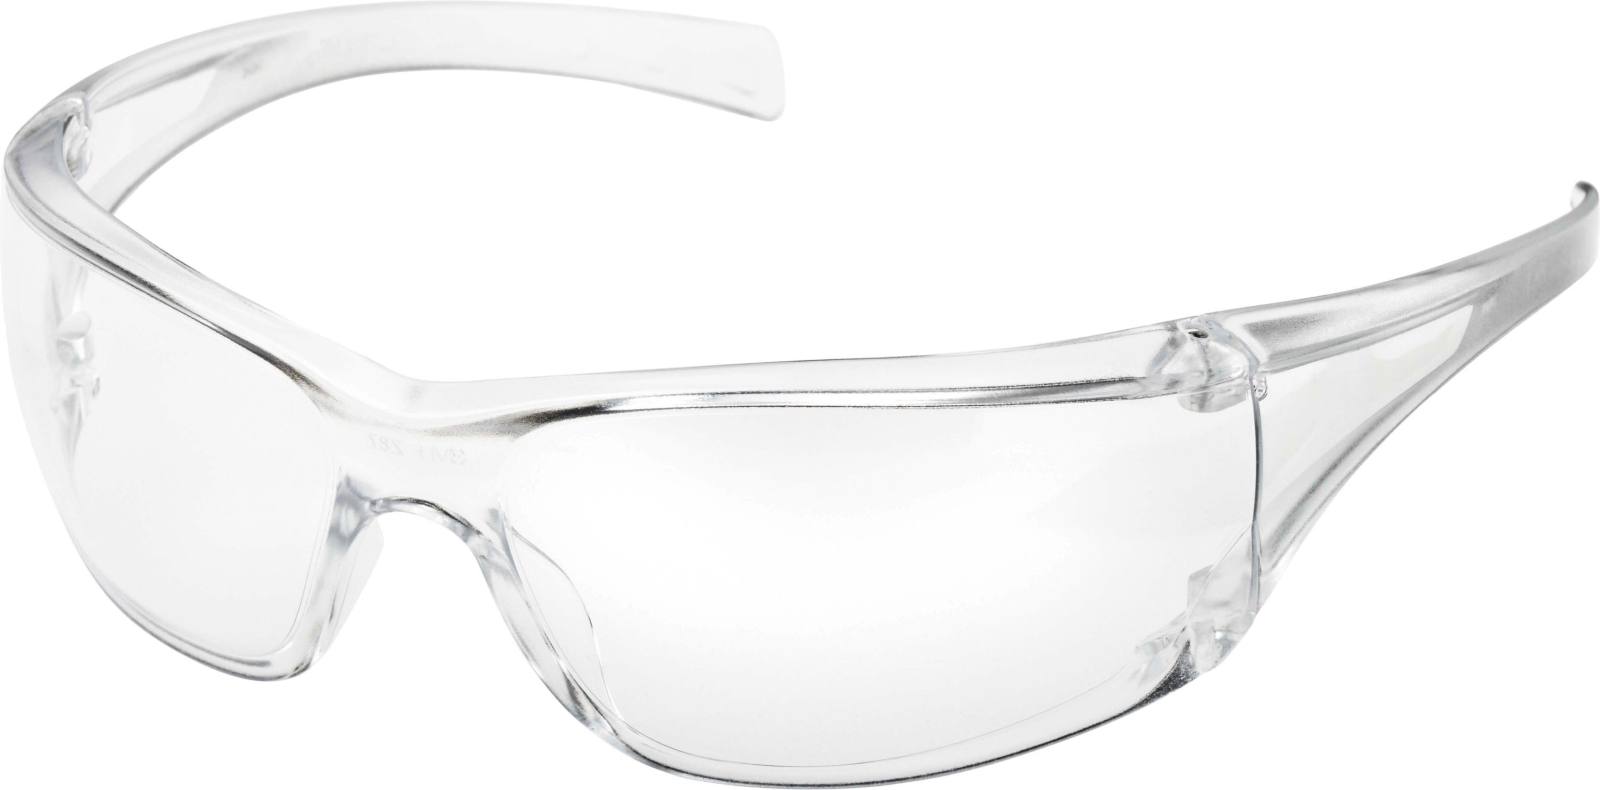 3M Safety goggles \